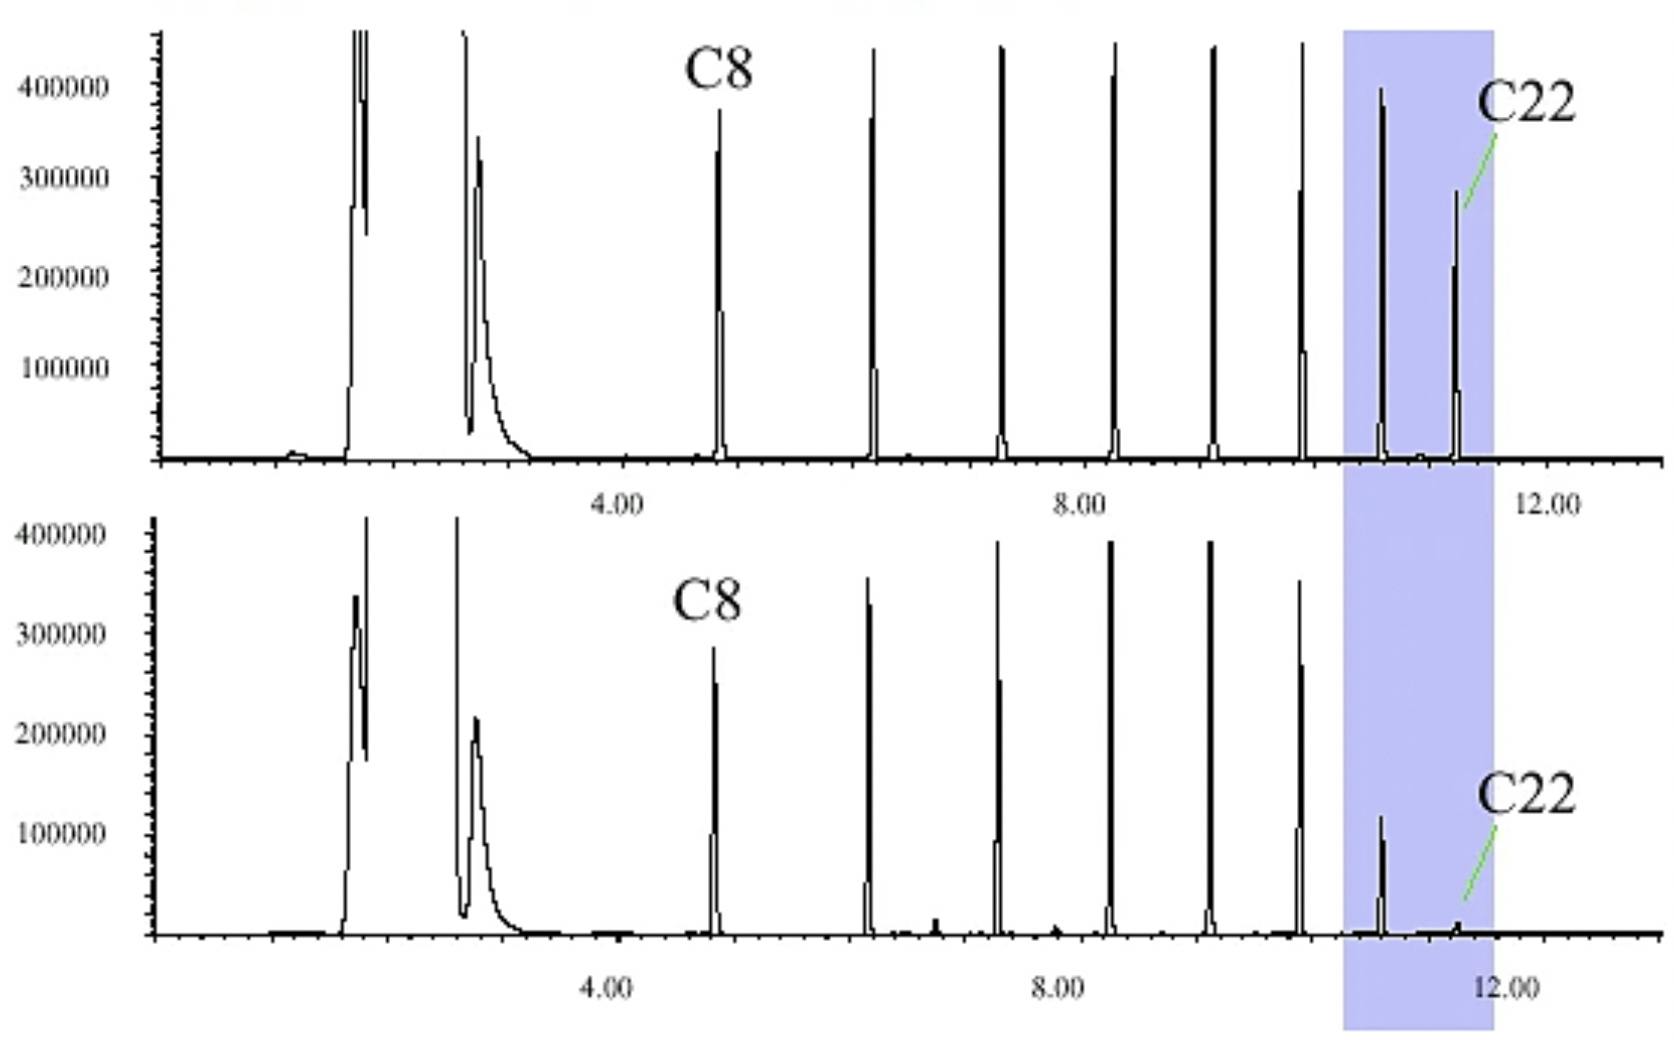 Loss of later eluting compounds due to analyte discrimination with in the split/splitless inlet.